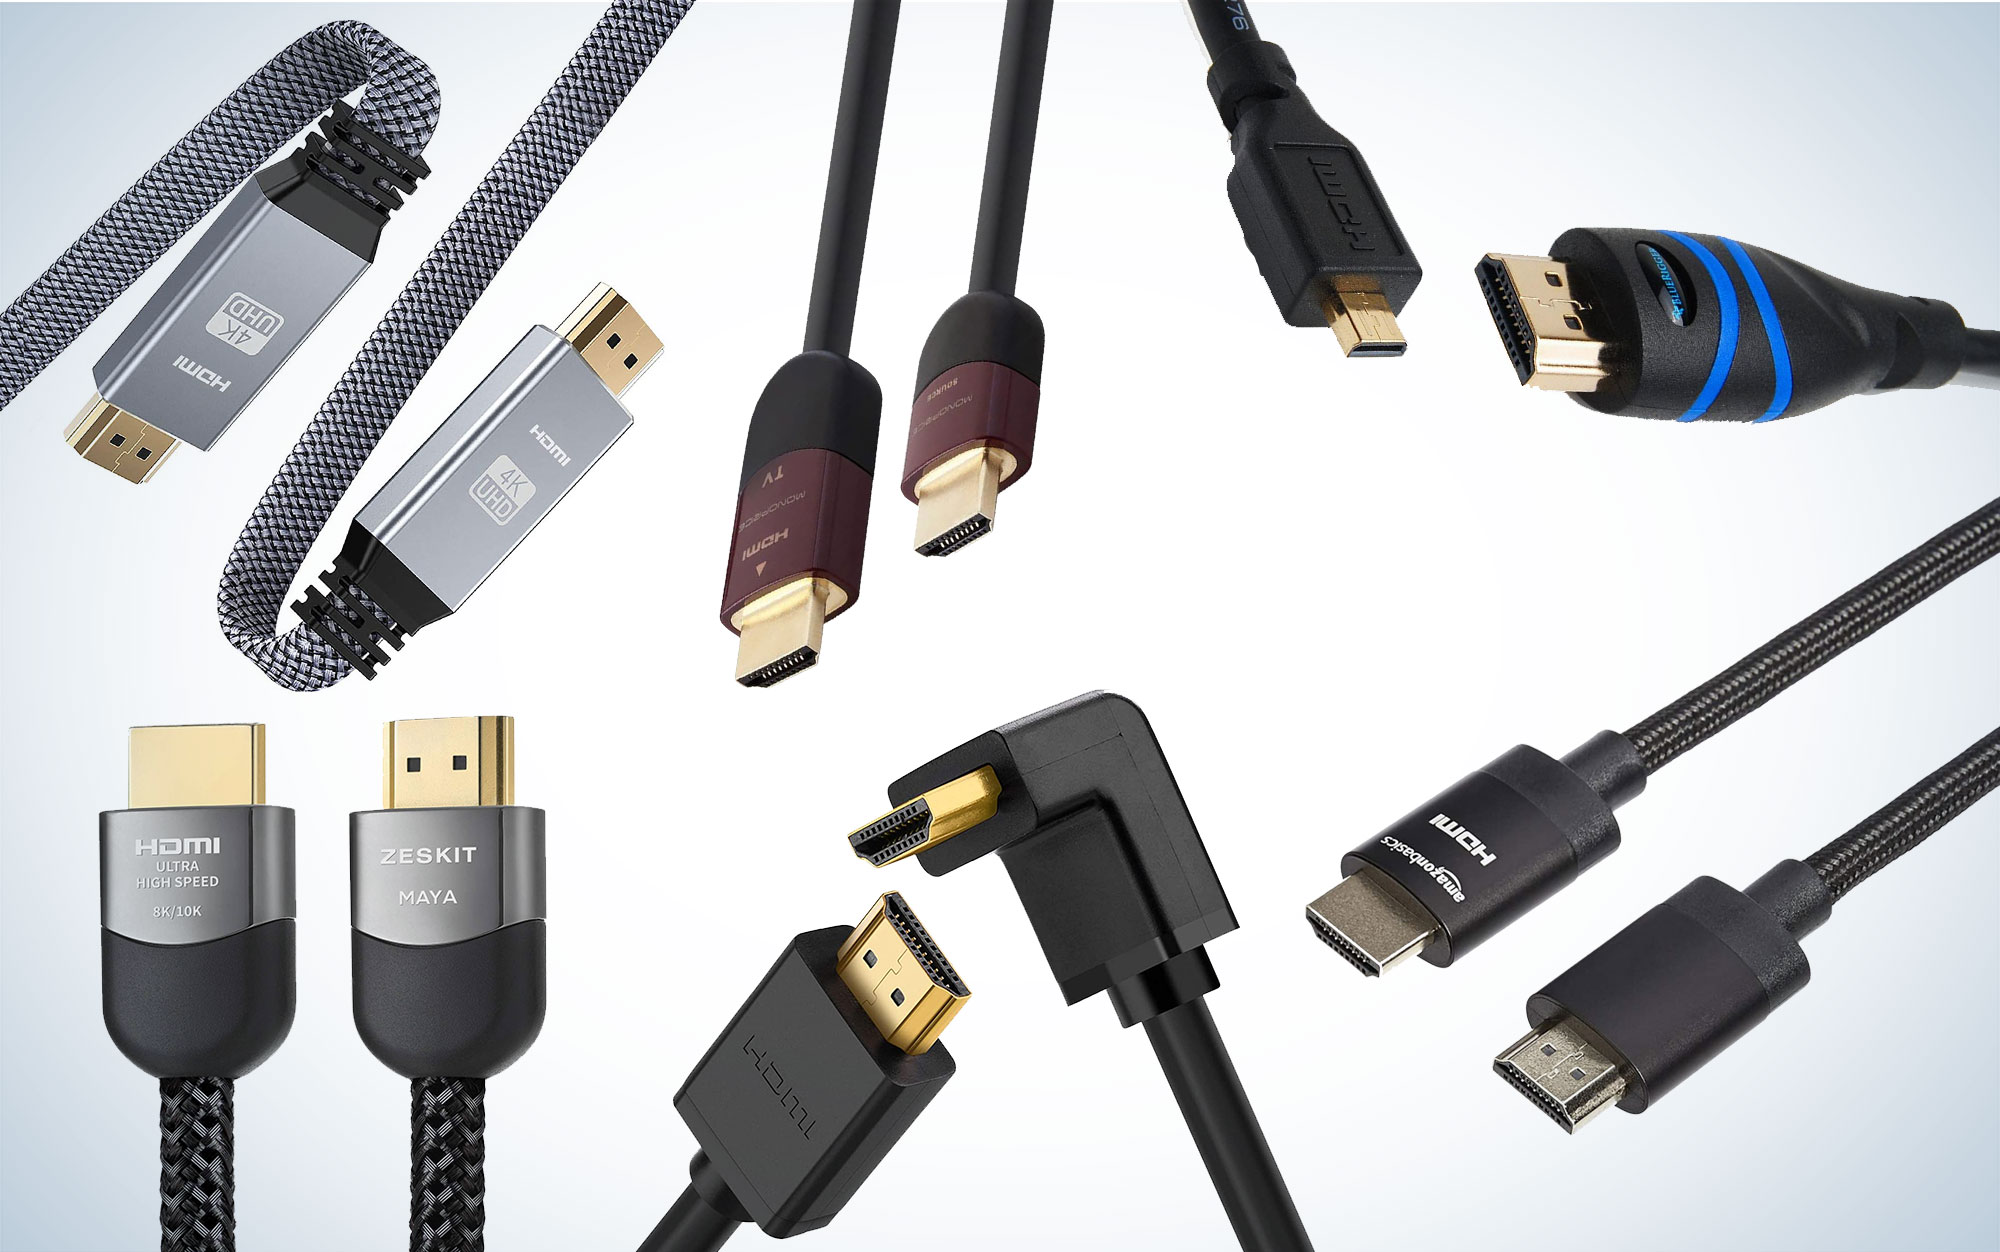 Hdmi Arc Cable - Best Buy